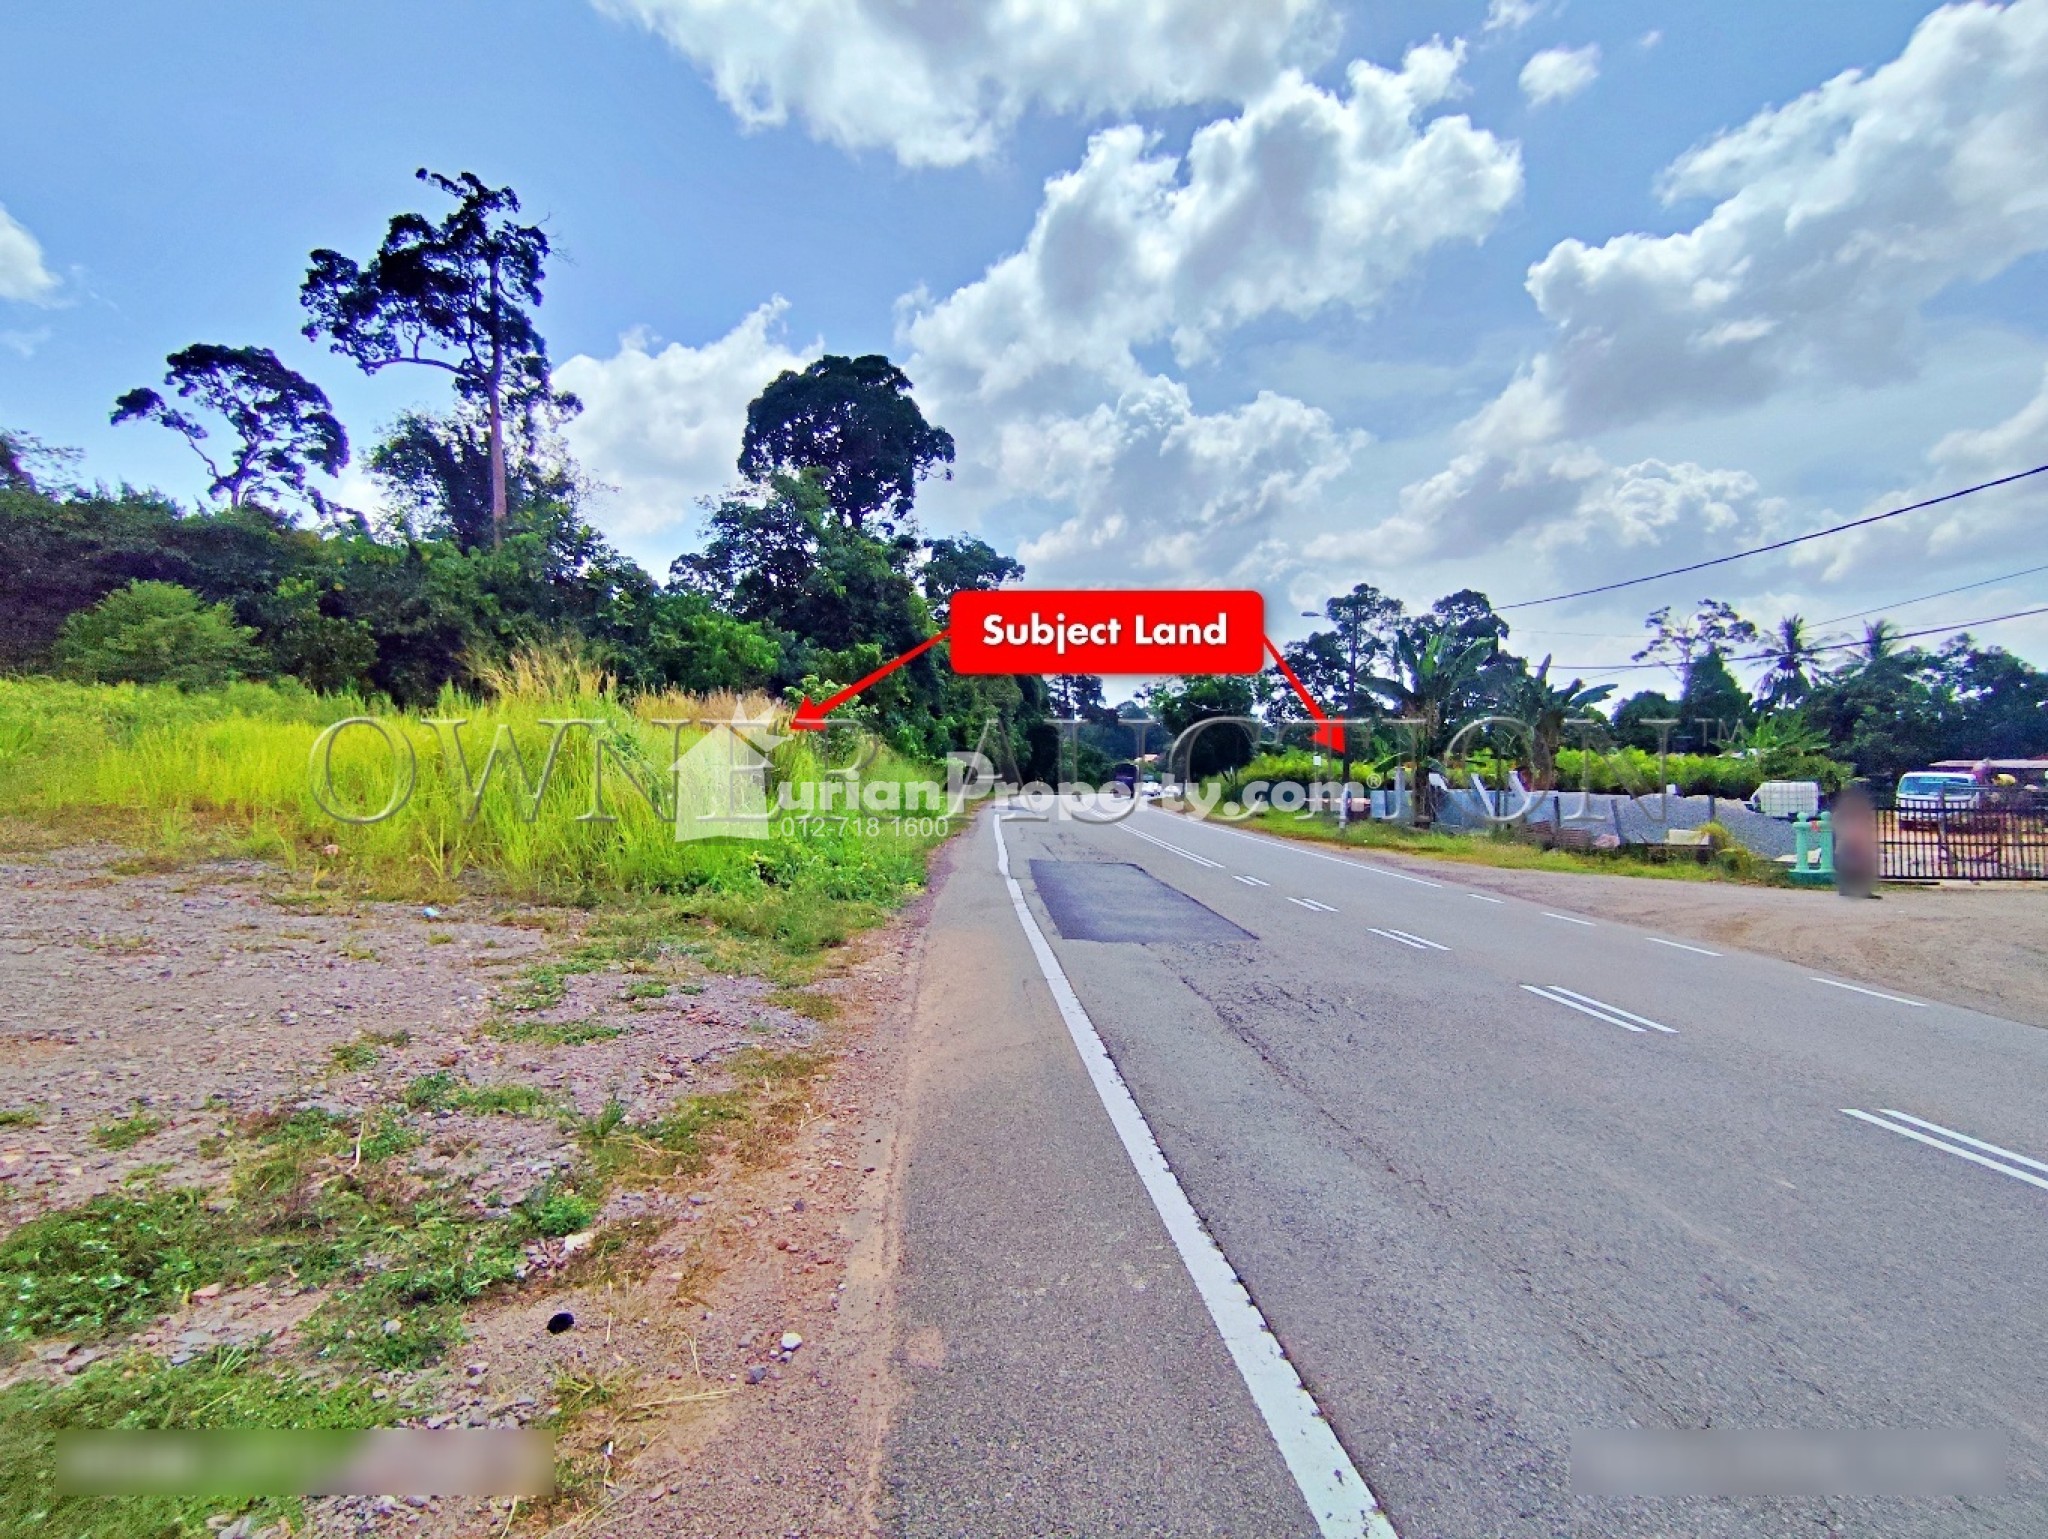 Agriculture Land For Auction at Segamat